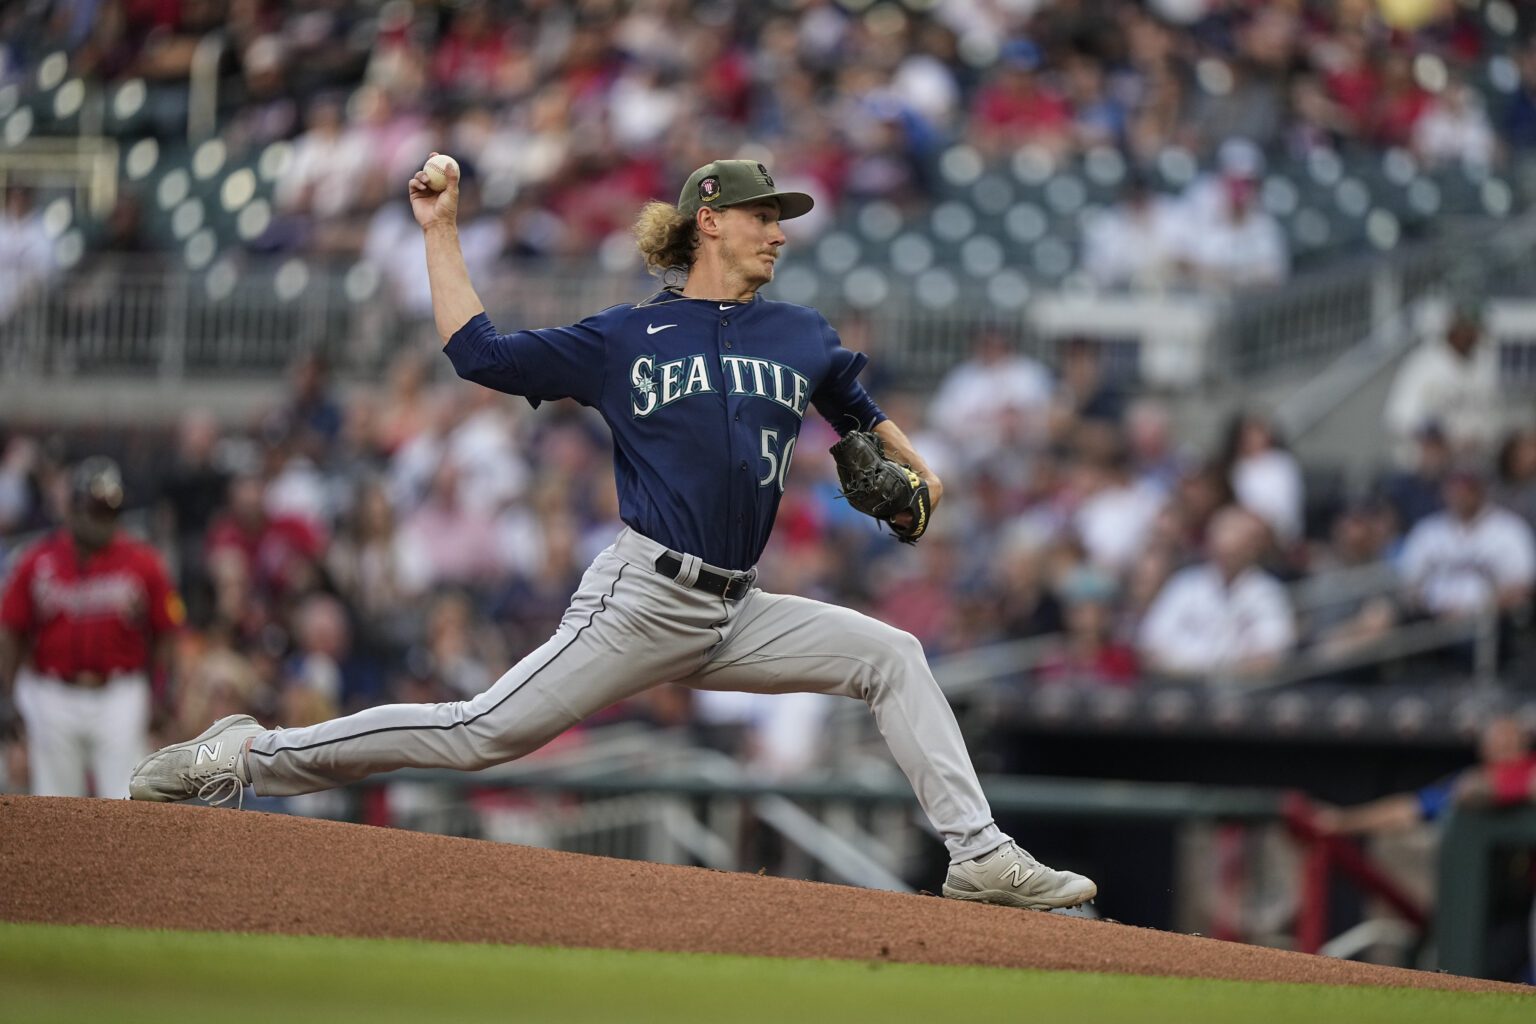 Seattle Mariners starting pitcher Bryce Miller delivers in the first inning of a baseball game against the Atlanta Braves